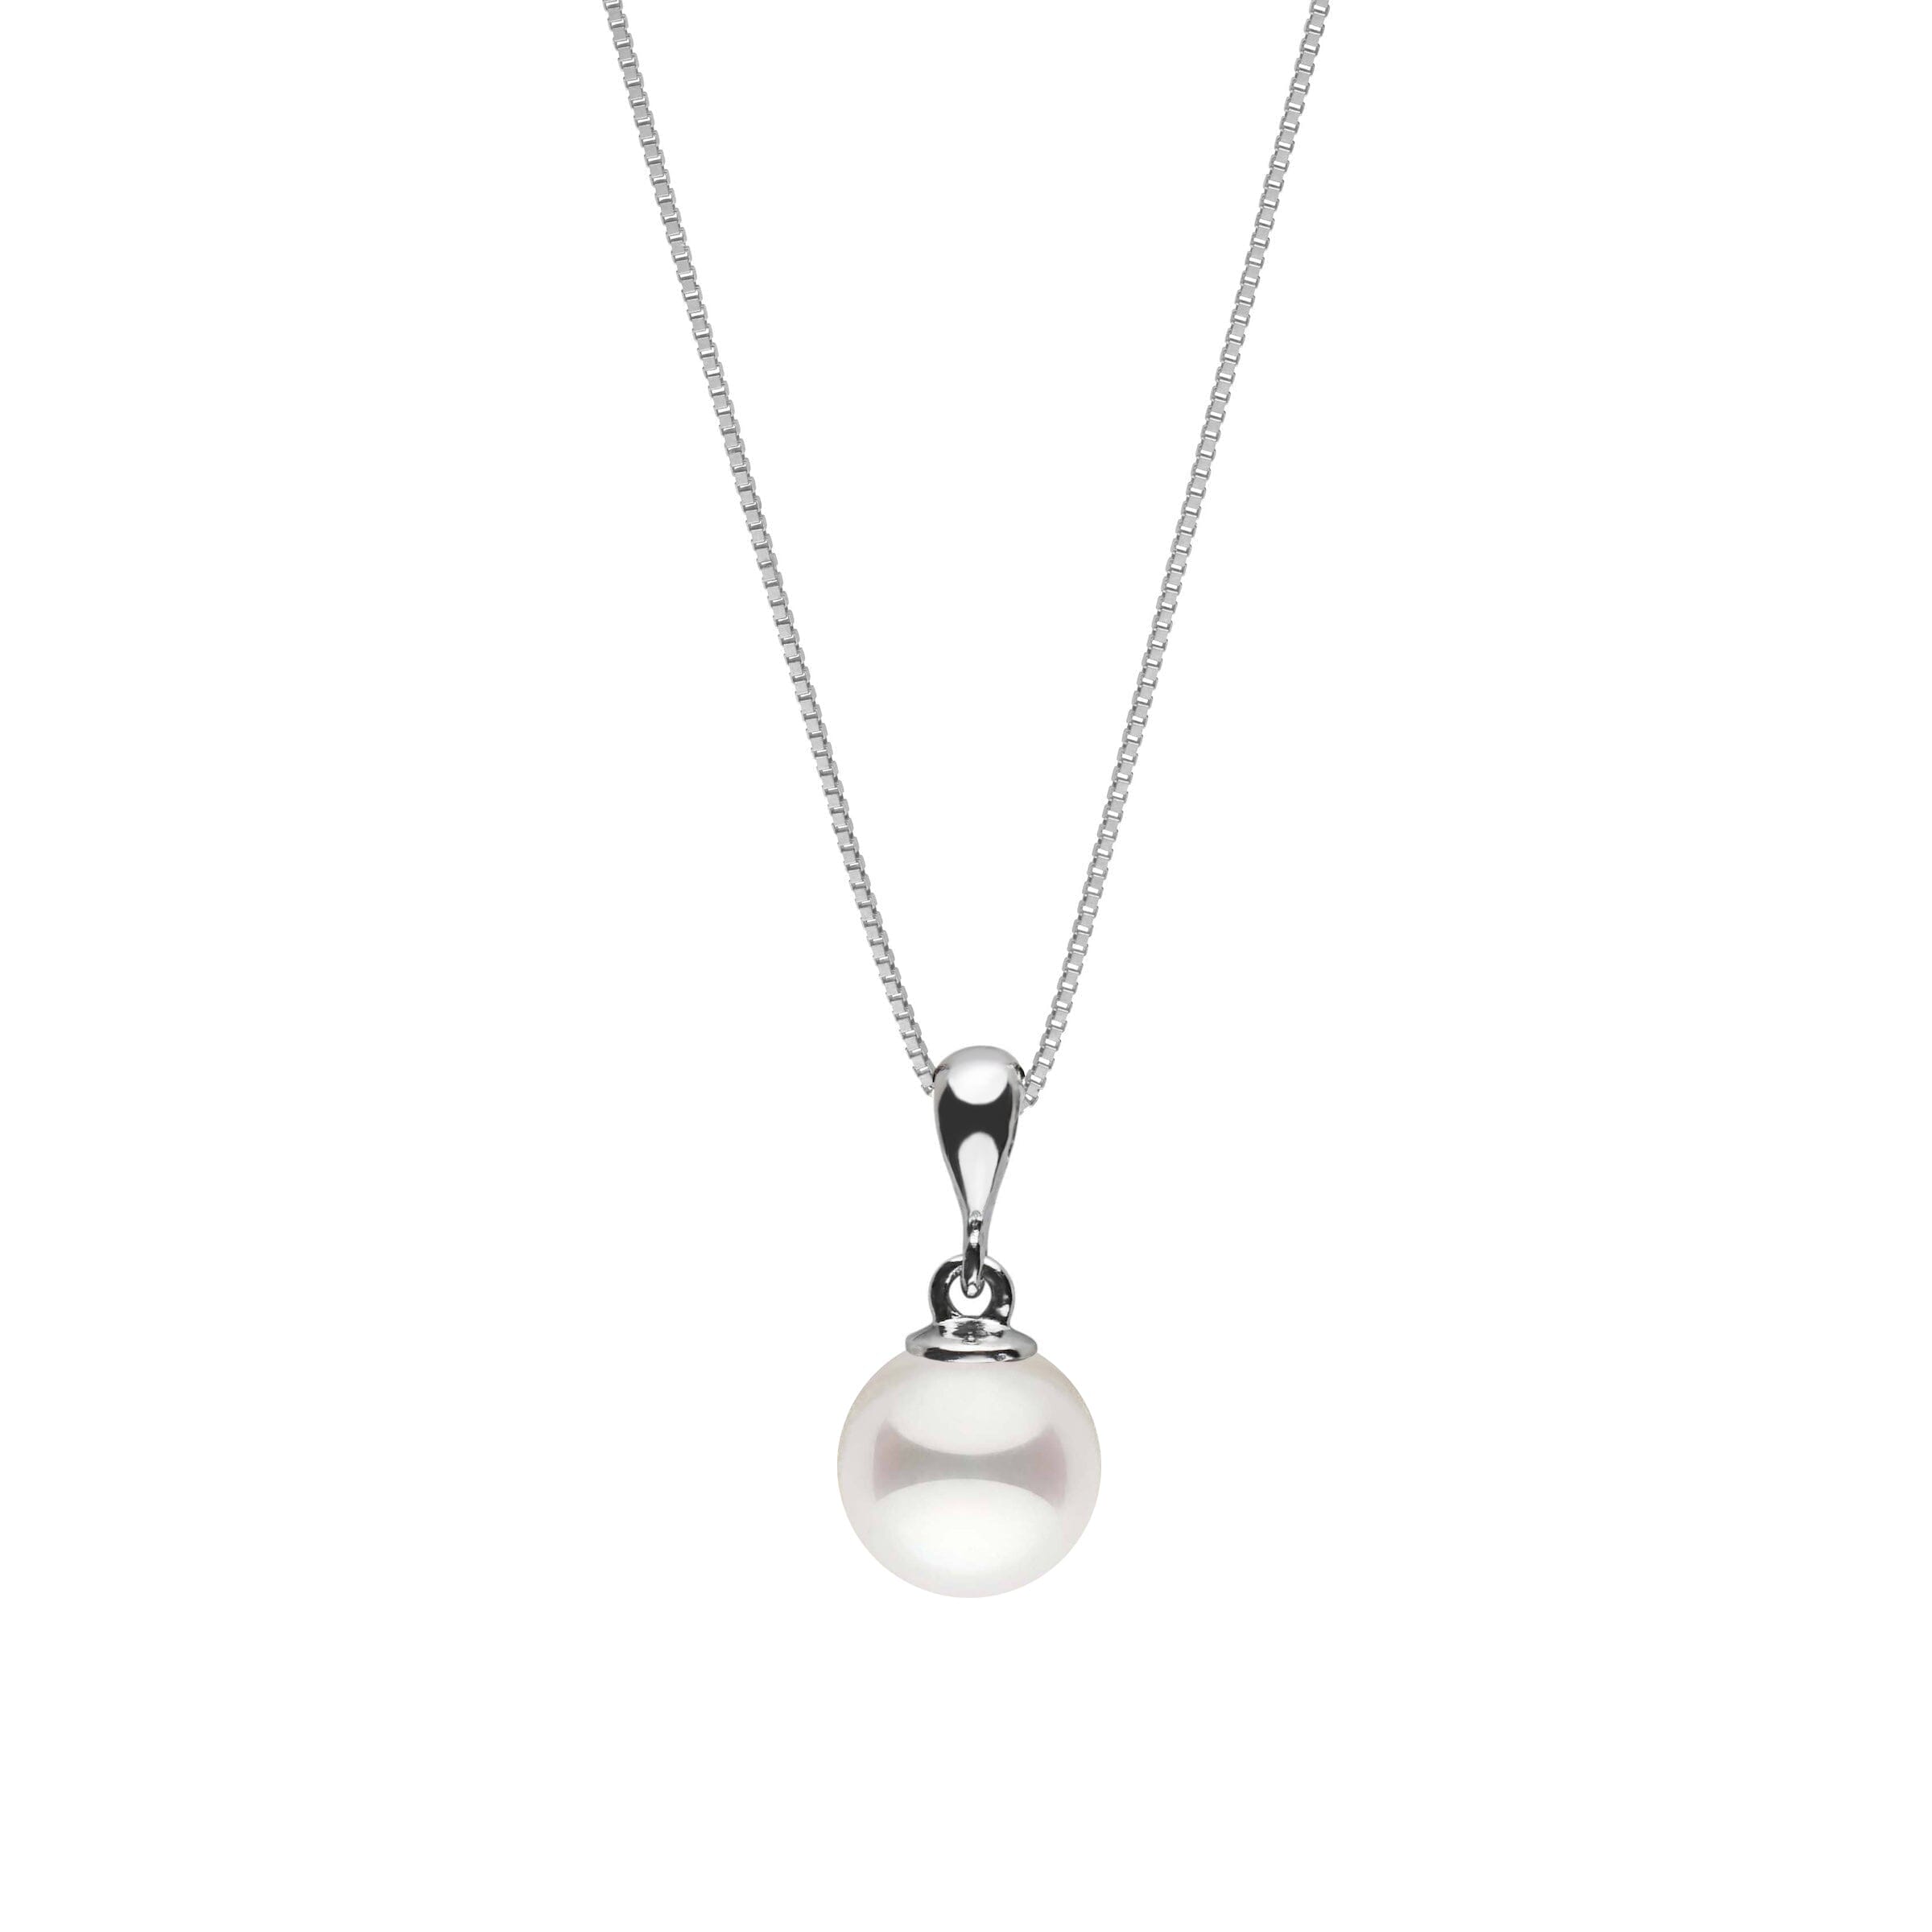 7.0-7.5 mm Akoya Pearl Grace Collection Pendant